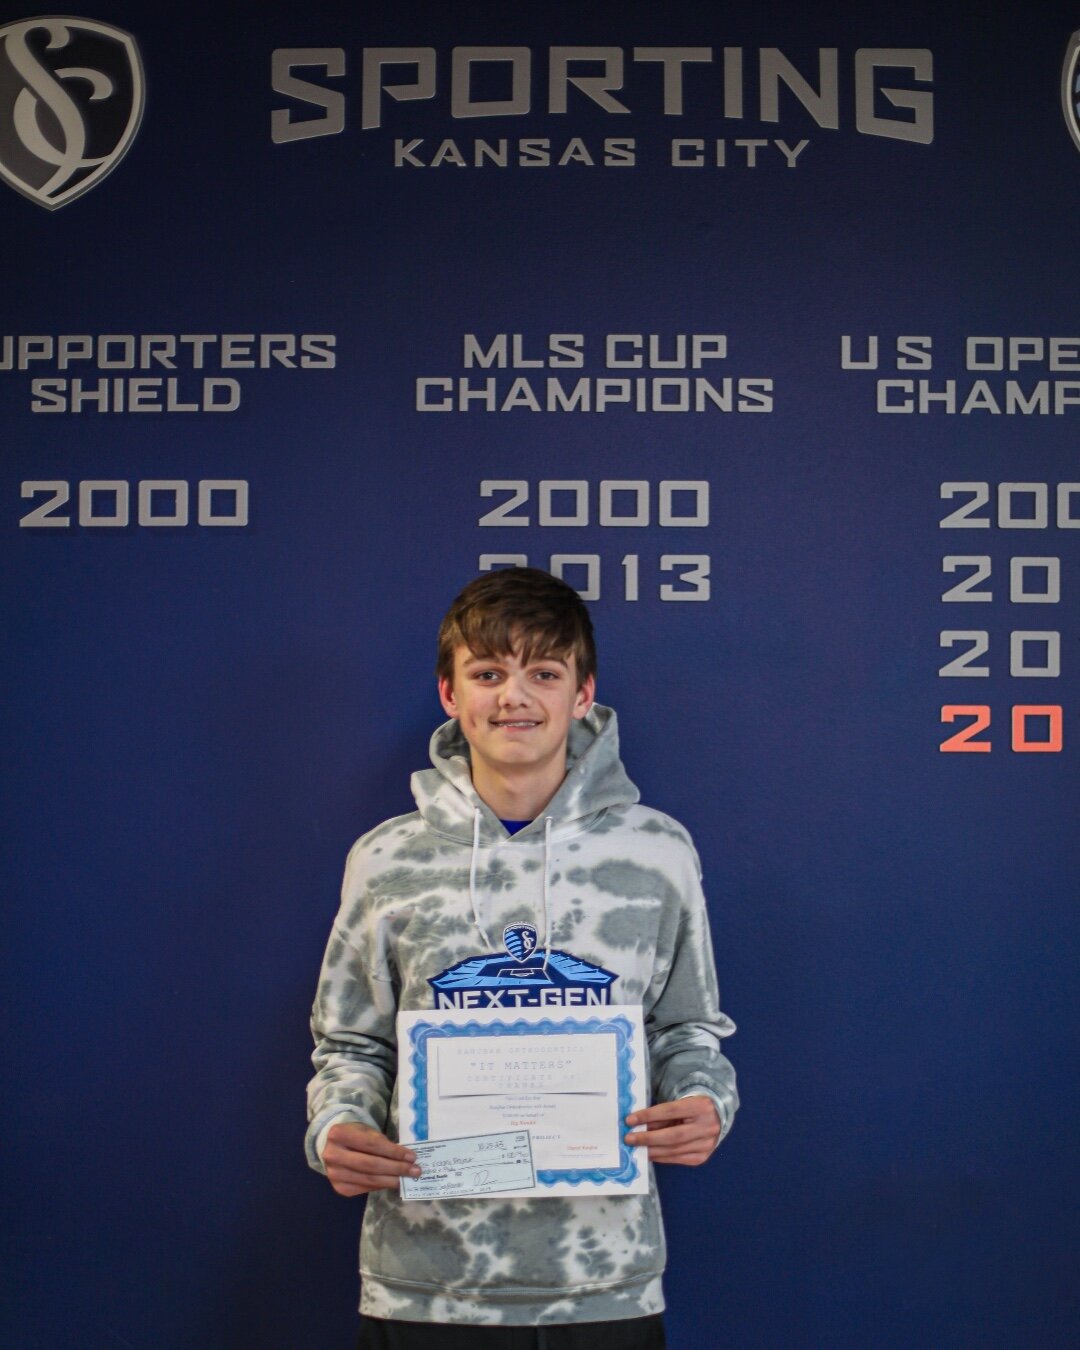 The season of giving gives back 🎁

@sportingkawvalley player Jeg Randol chose to support The Victory Project through his orthodontist, Ranjbar Orthodontics!

He raised, donated, and delivered $100 to the @SportingKC offices to support The Victory Pr